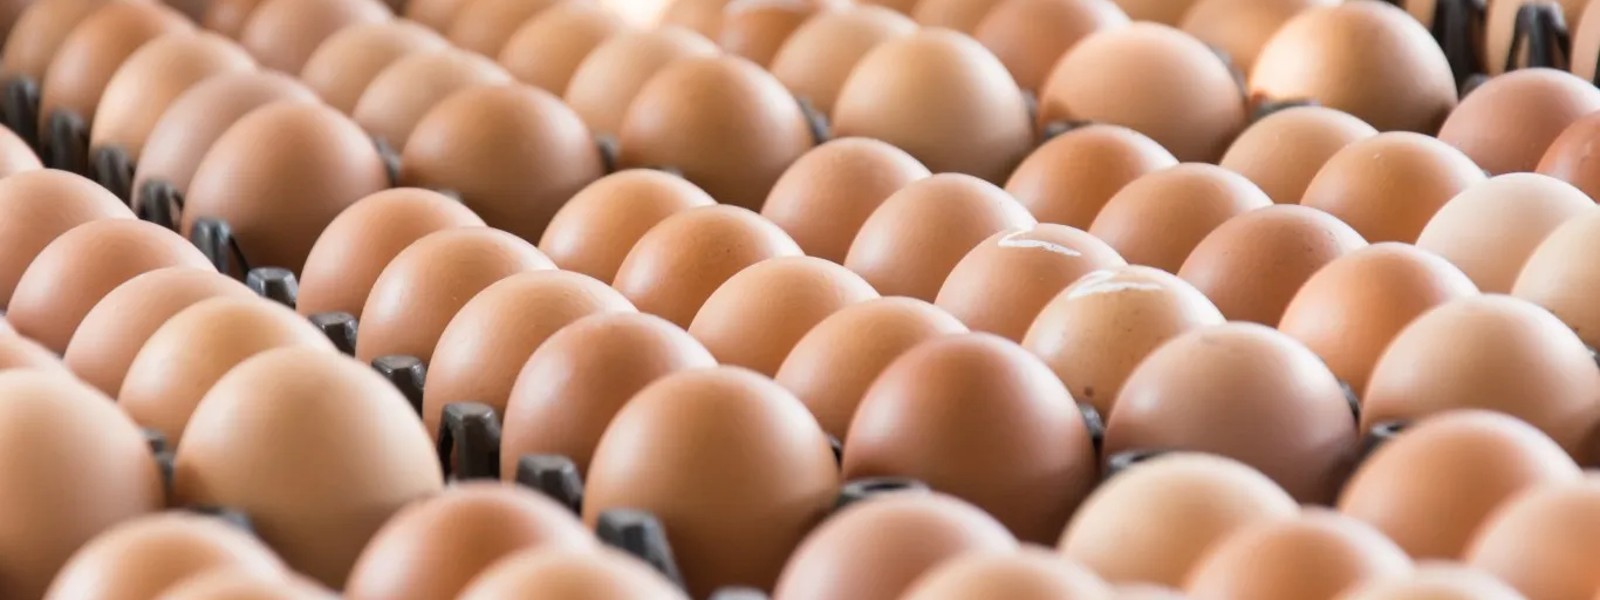 Another consignment reaches Colombo Port; egg prices expected to drop